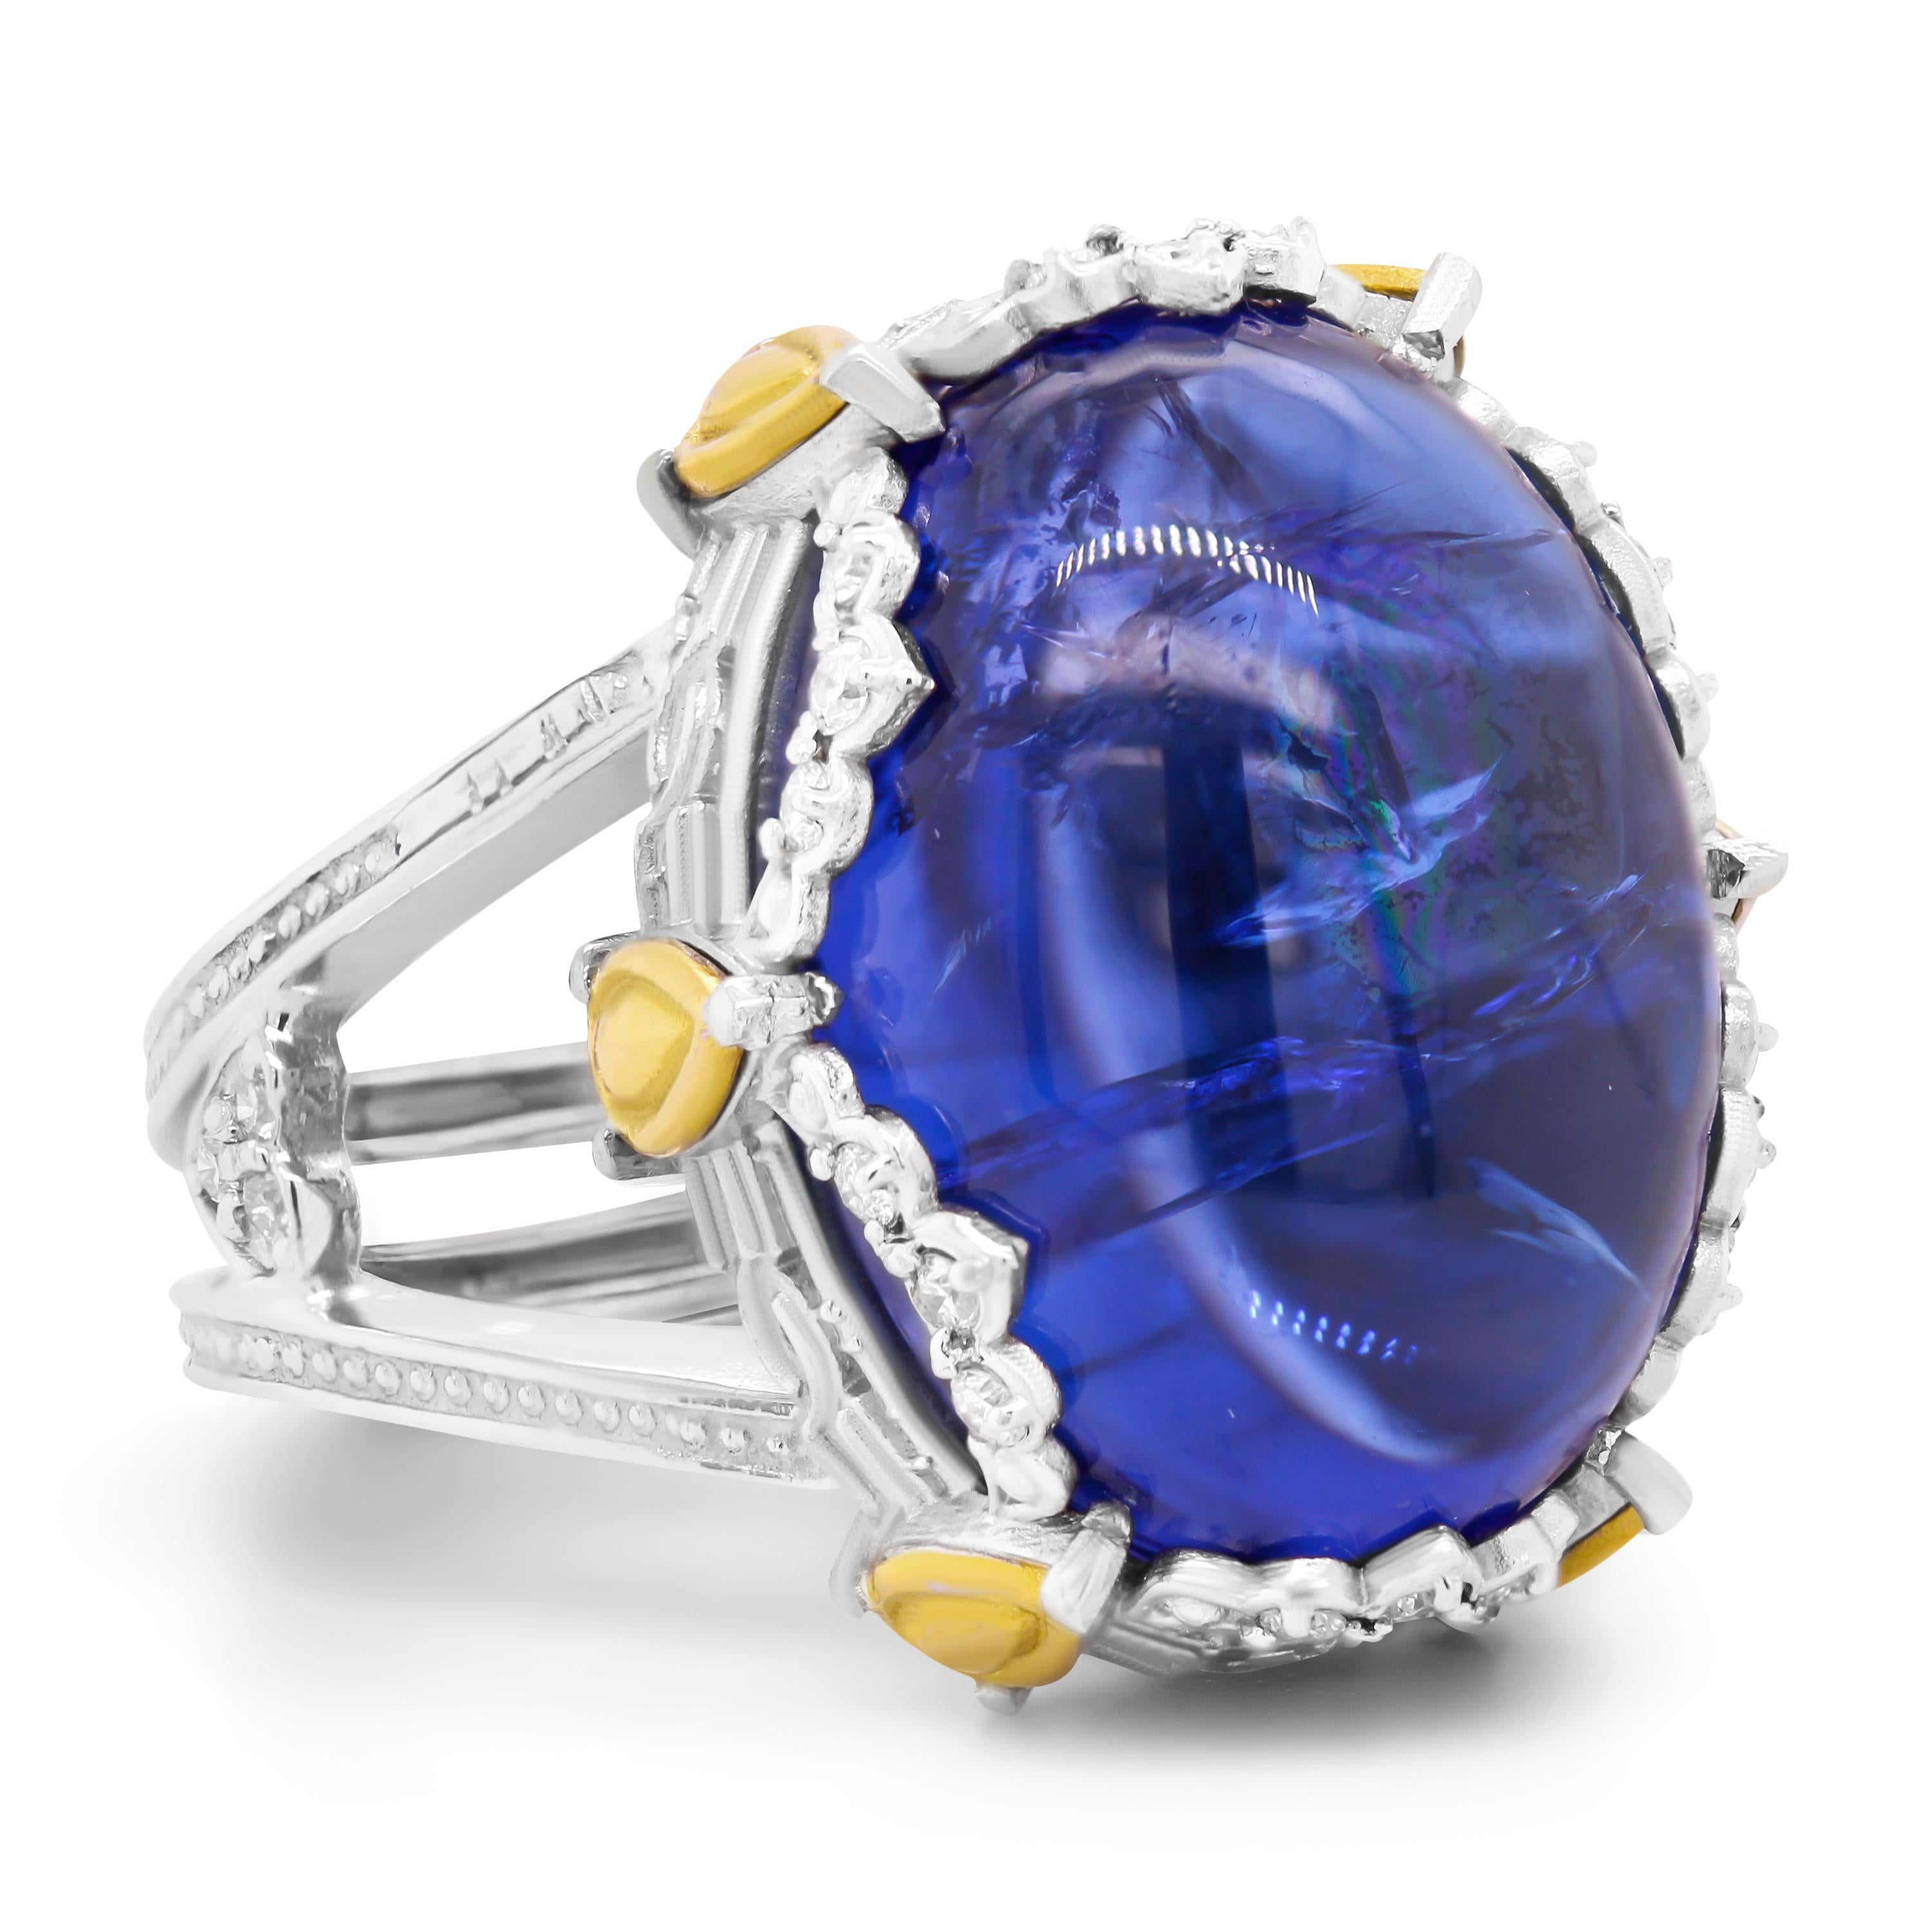 Stambolian 18K Two Tone Gold Diamond AAA Quality Cabochon Tanzanite Dome Ring

This one-of-a-kind ring features an AAA quality, vibrant blue, Cabochon Tanzanite center with diamonds and gold design work all across the edges.

Apprx. 18.20 carat